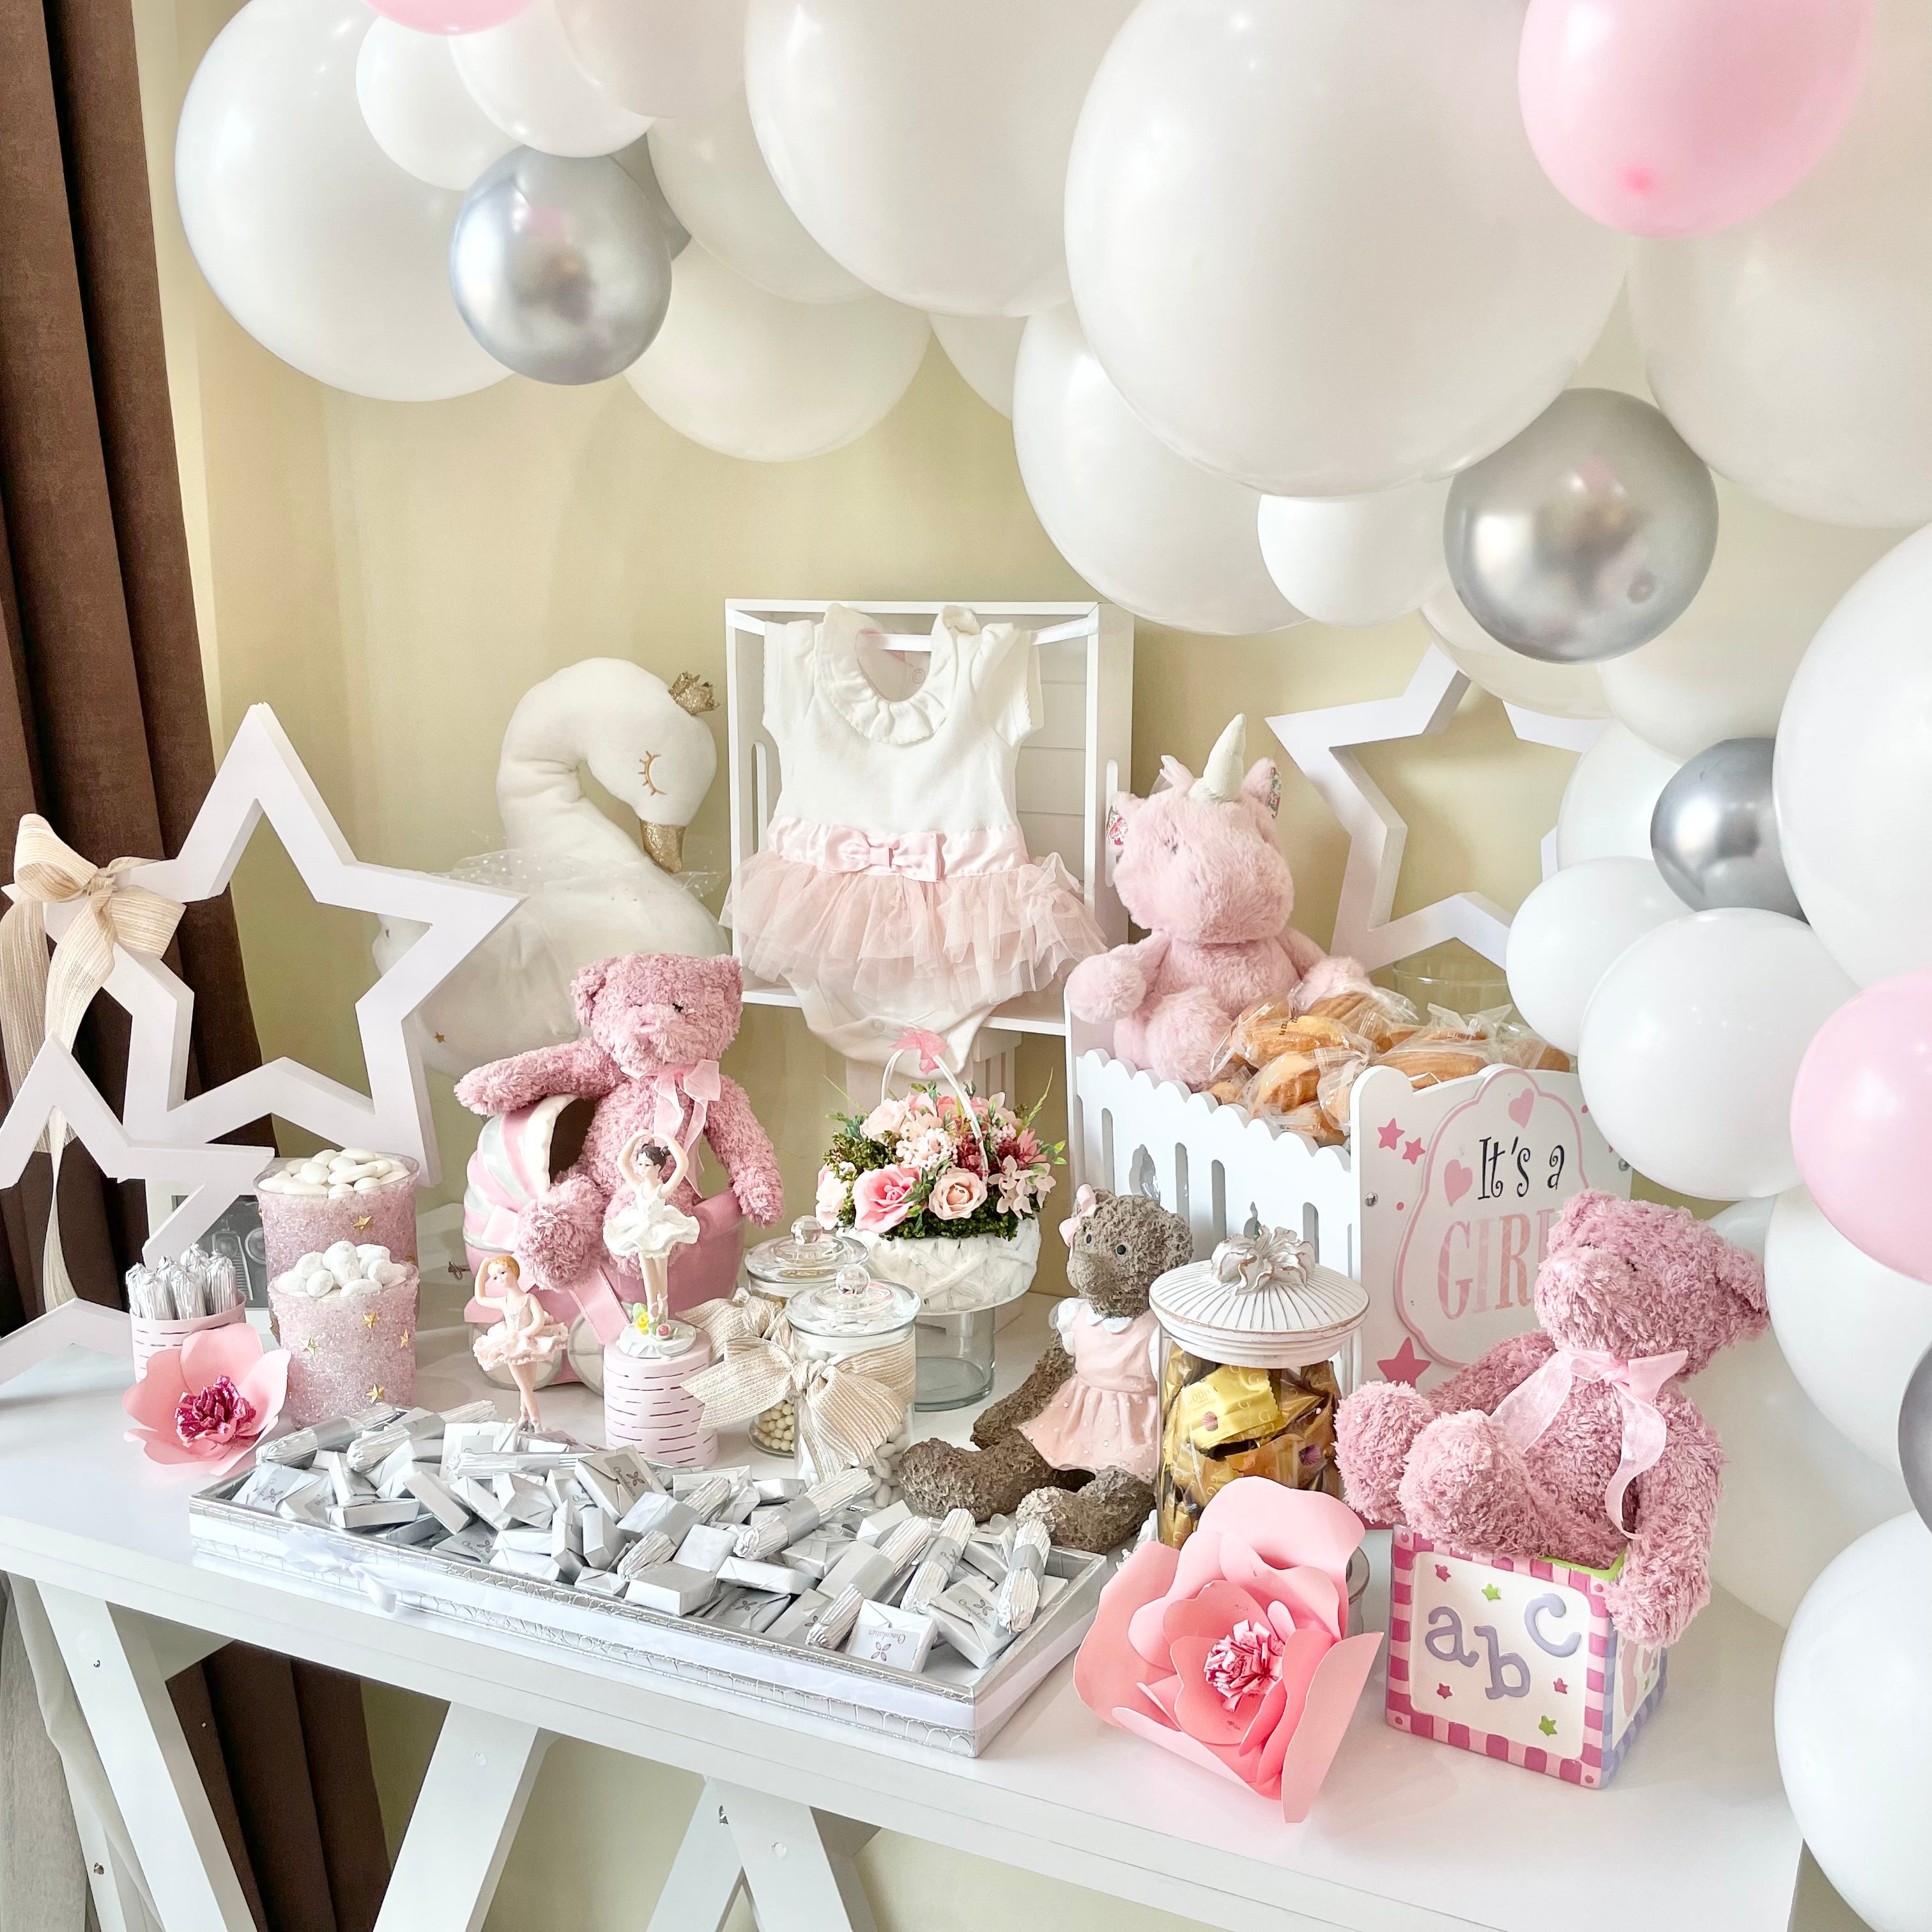 TABLE DECOR – Baby Showers and More